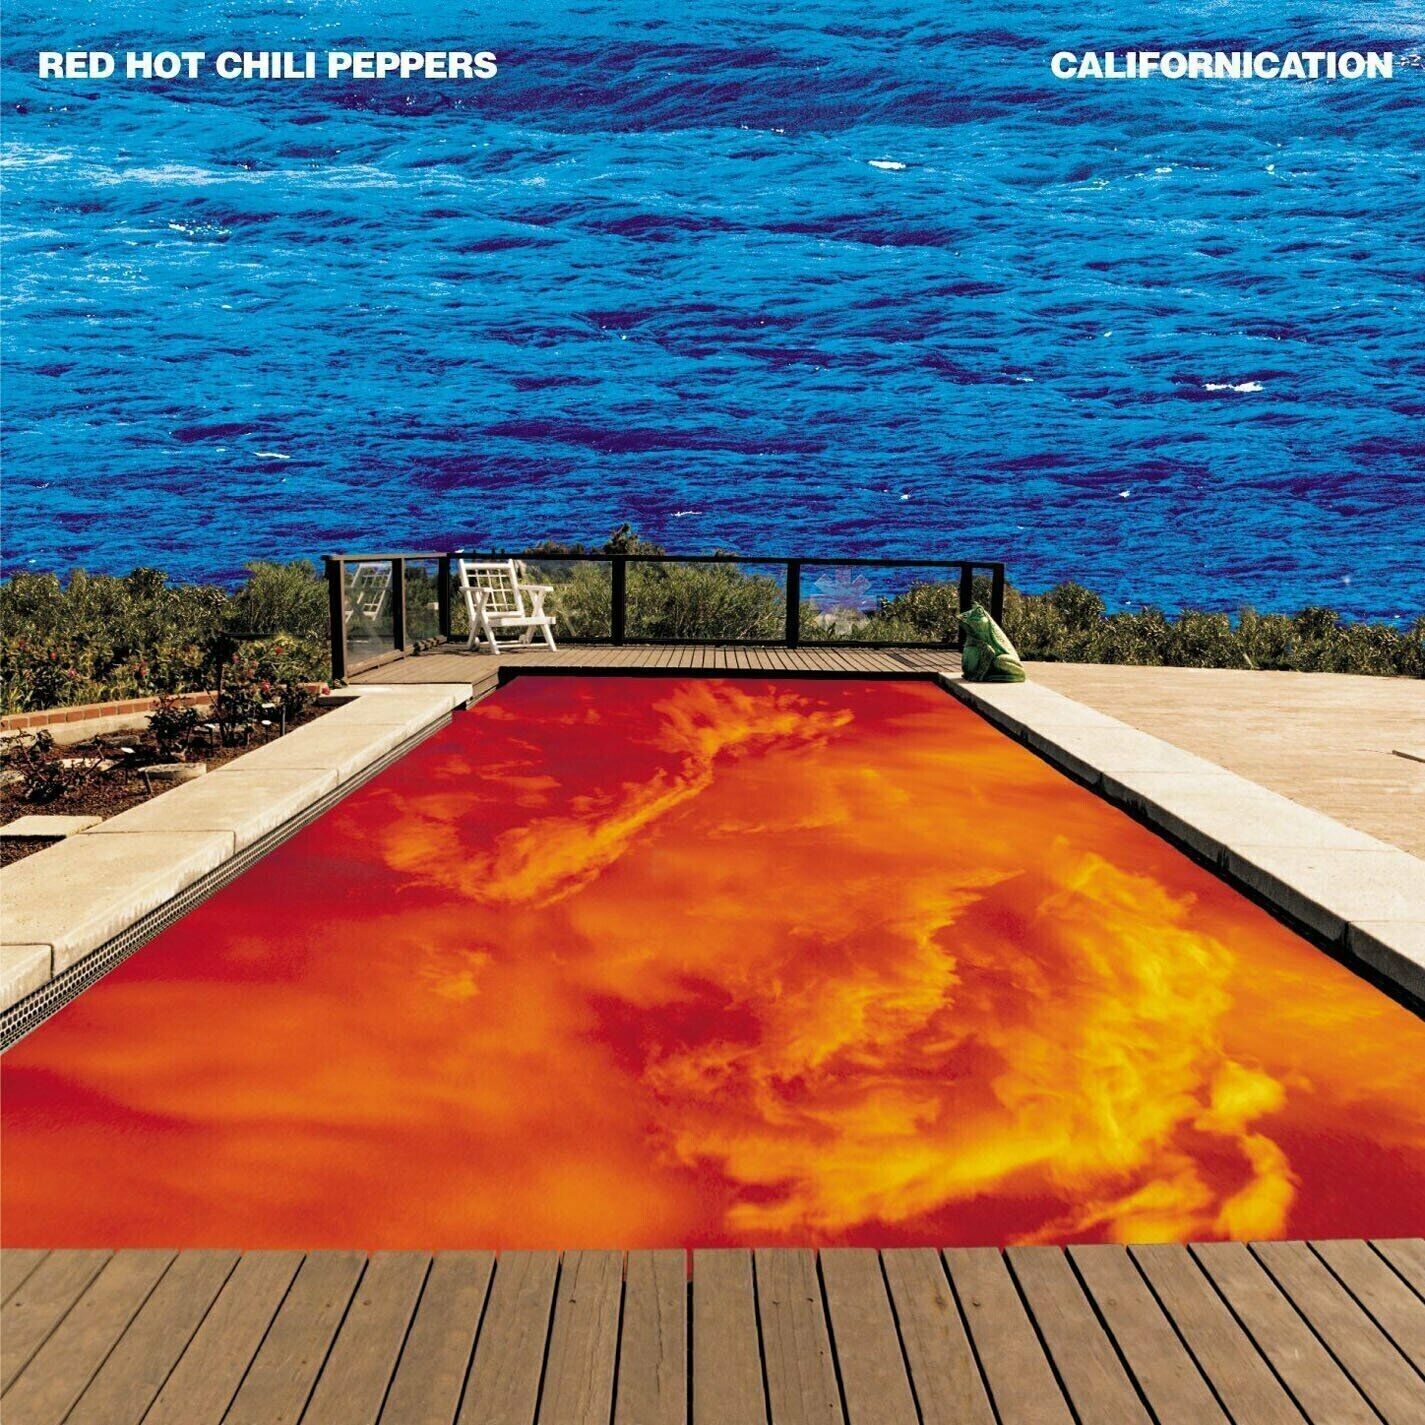 Red Hot Chili Peppers - Californication vinyl LP NEW/SEALED IN STOCK